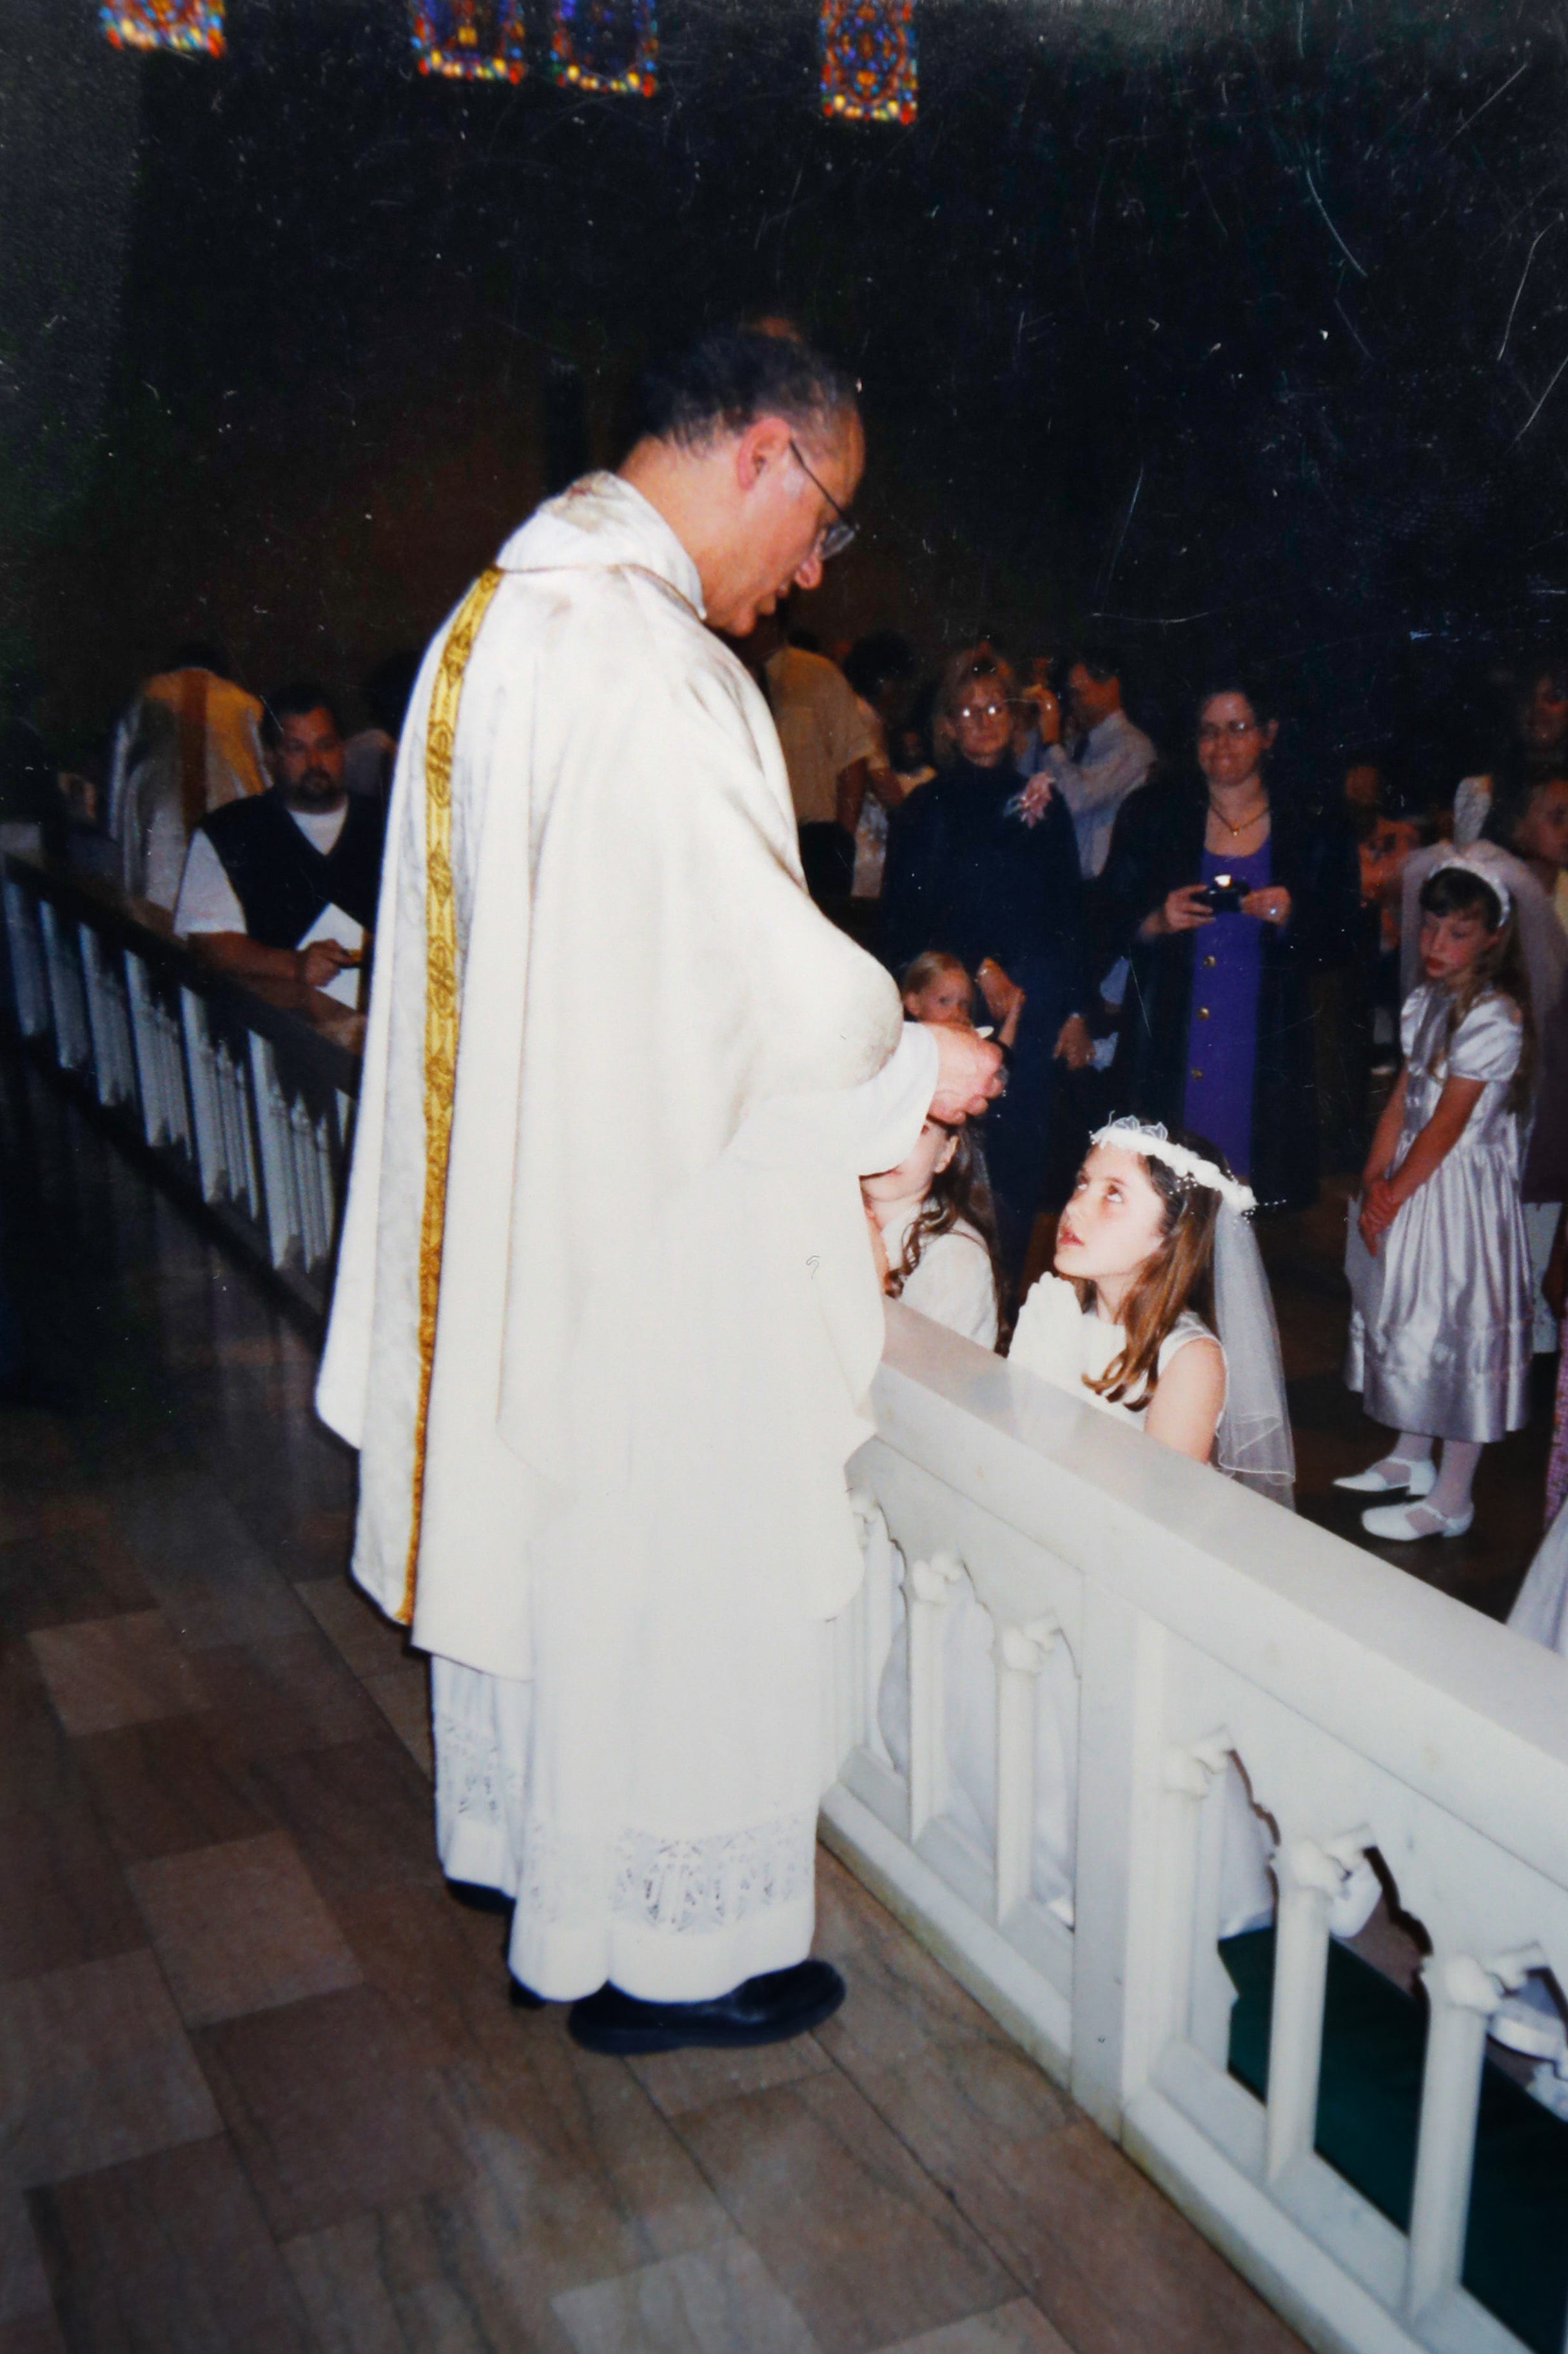 This photo provided by Mary Rose Maher shows her as a child during her First Communion with the Rev. Eduard Perrone at The Assumption of the Blessed Virgin Mary Church in Detroit.